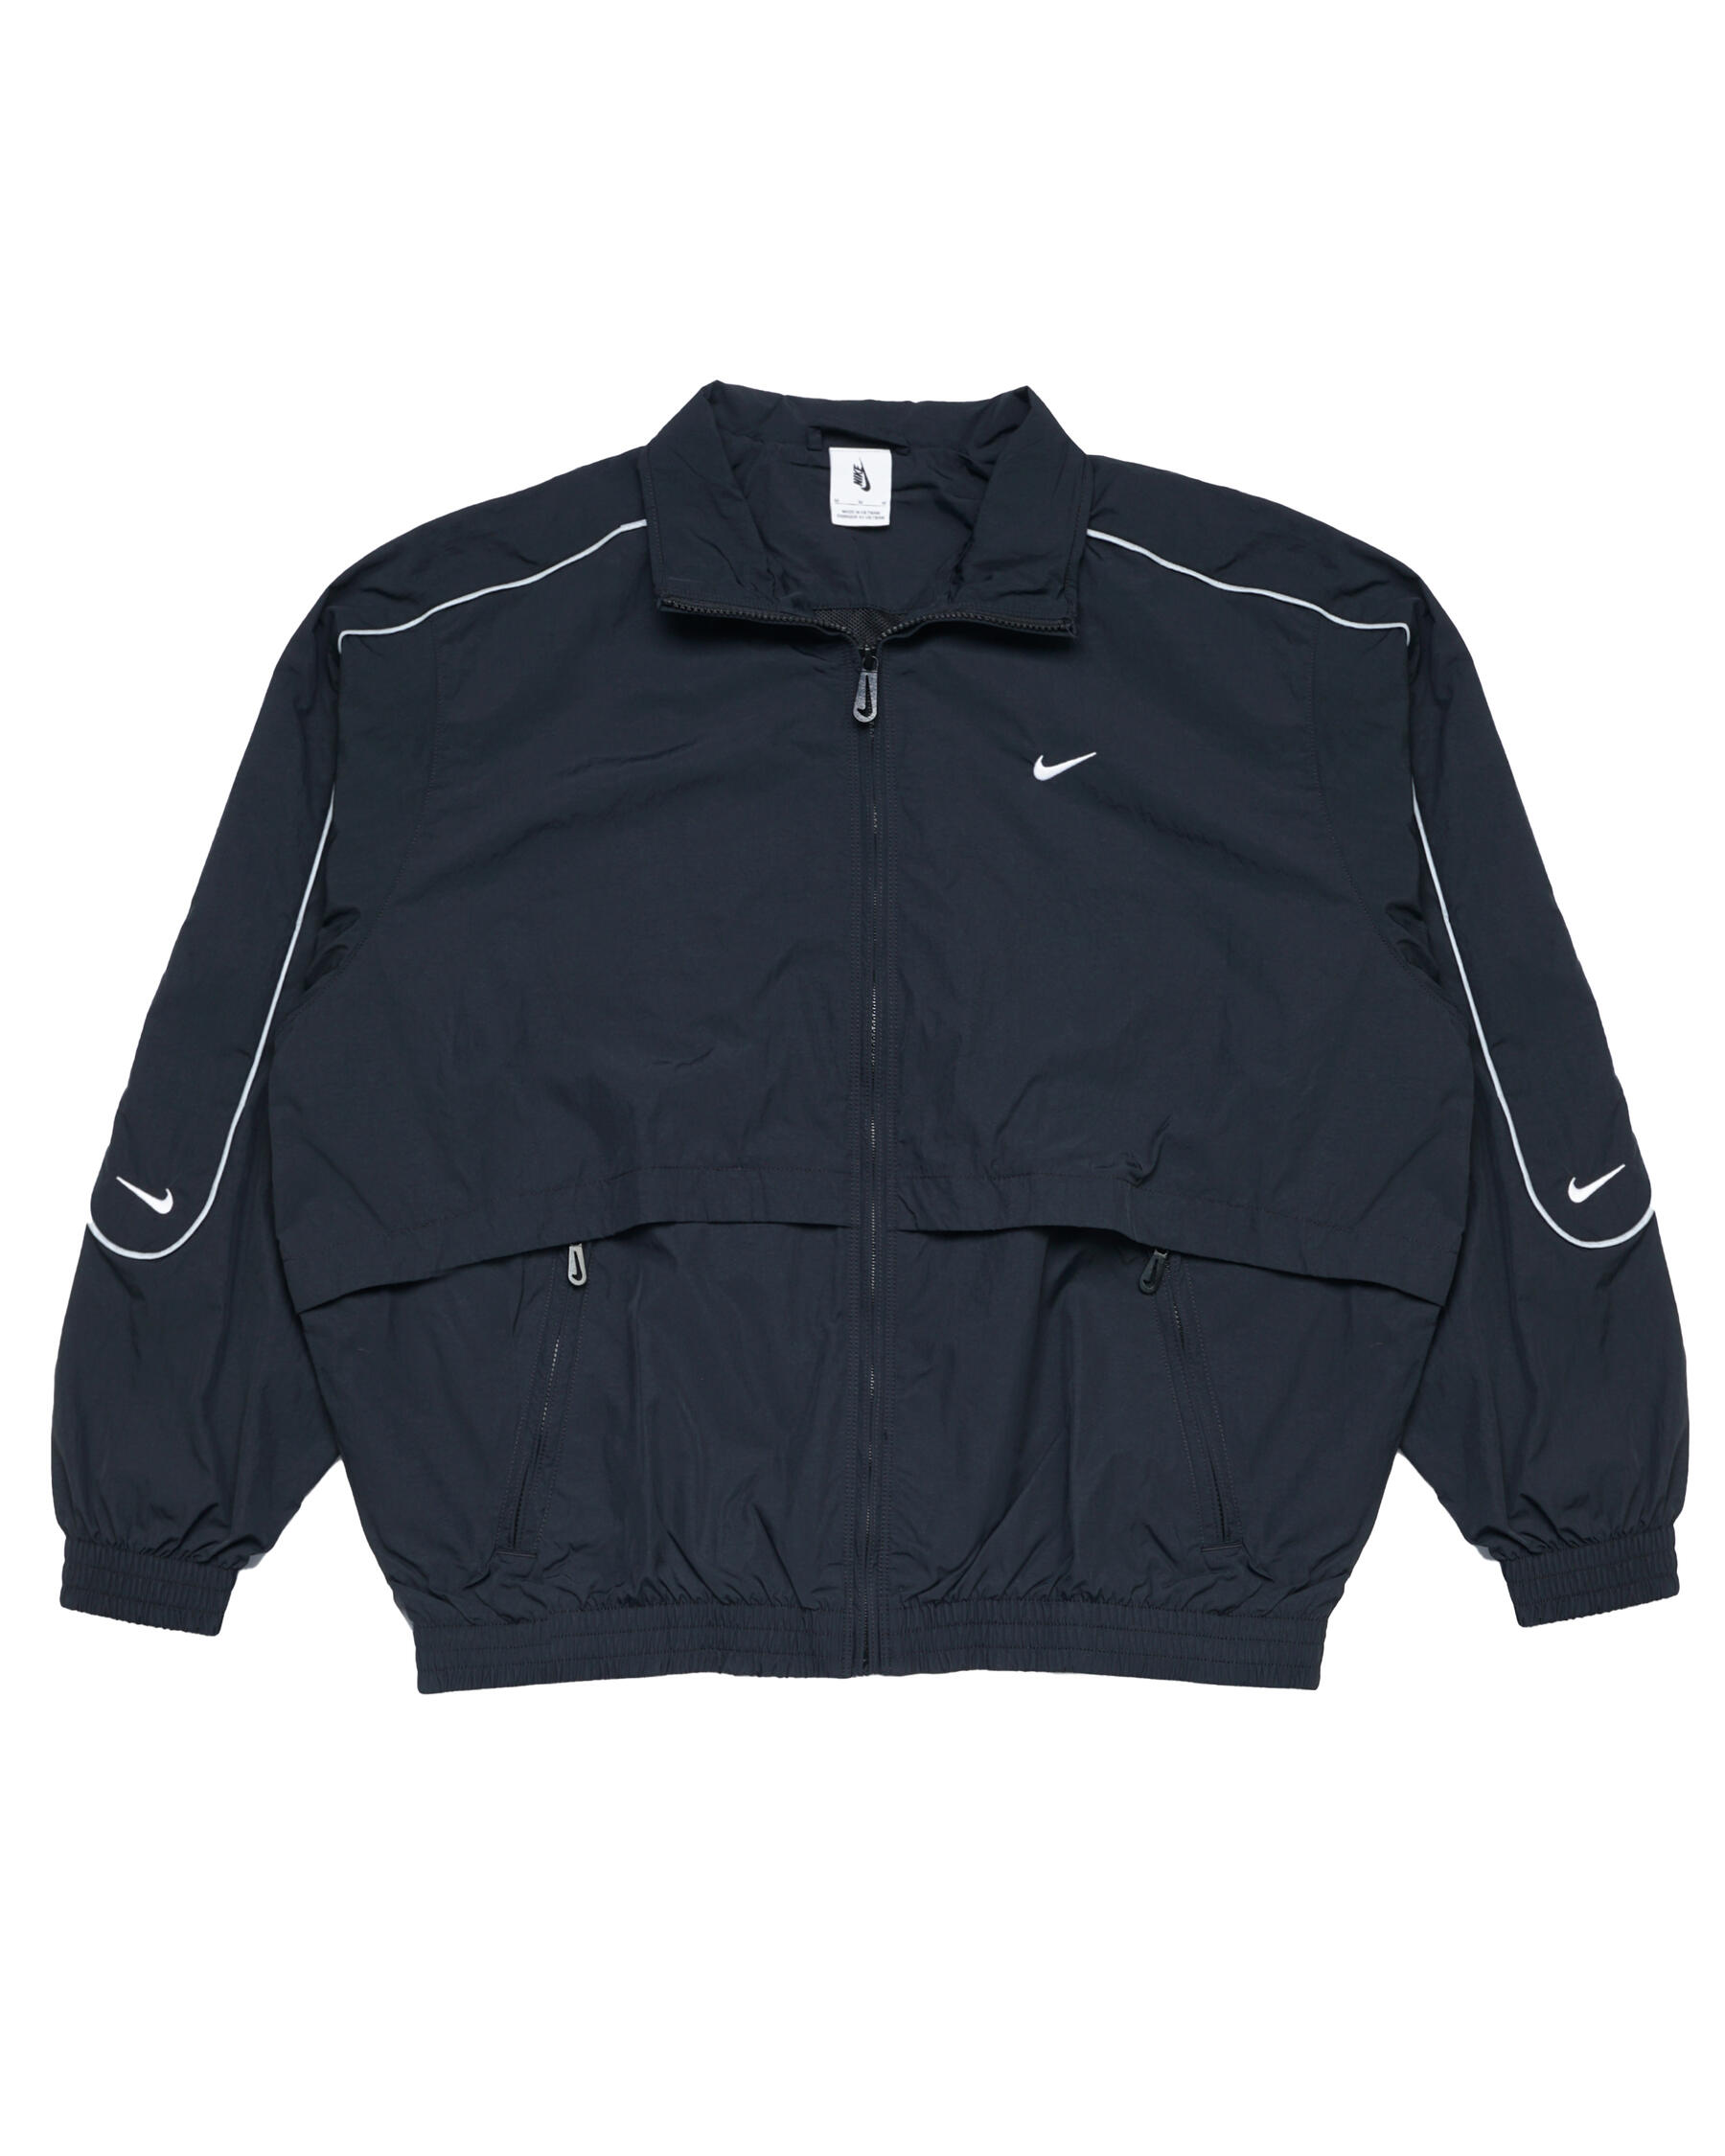 Nike SOLO SWOOSH WOVEN TRACK JACKET | FB8622-010 | AFEW STORE